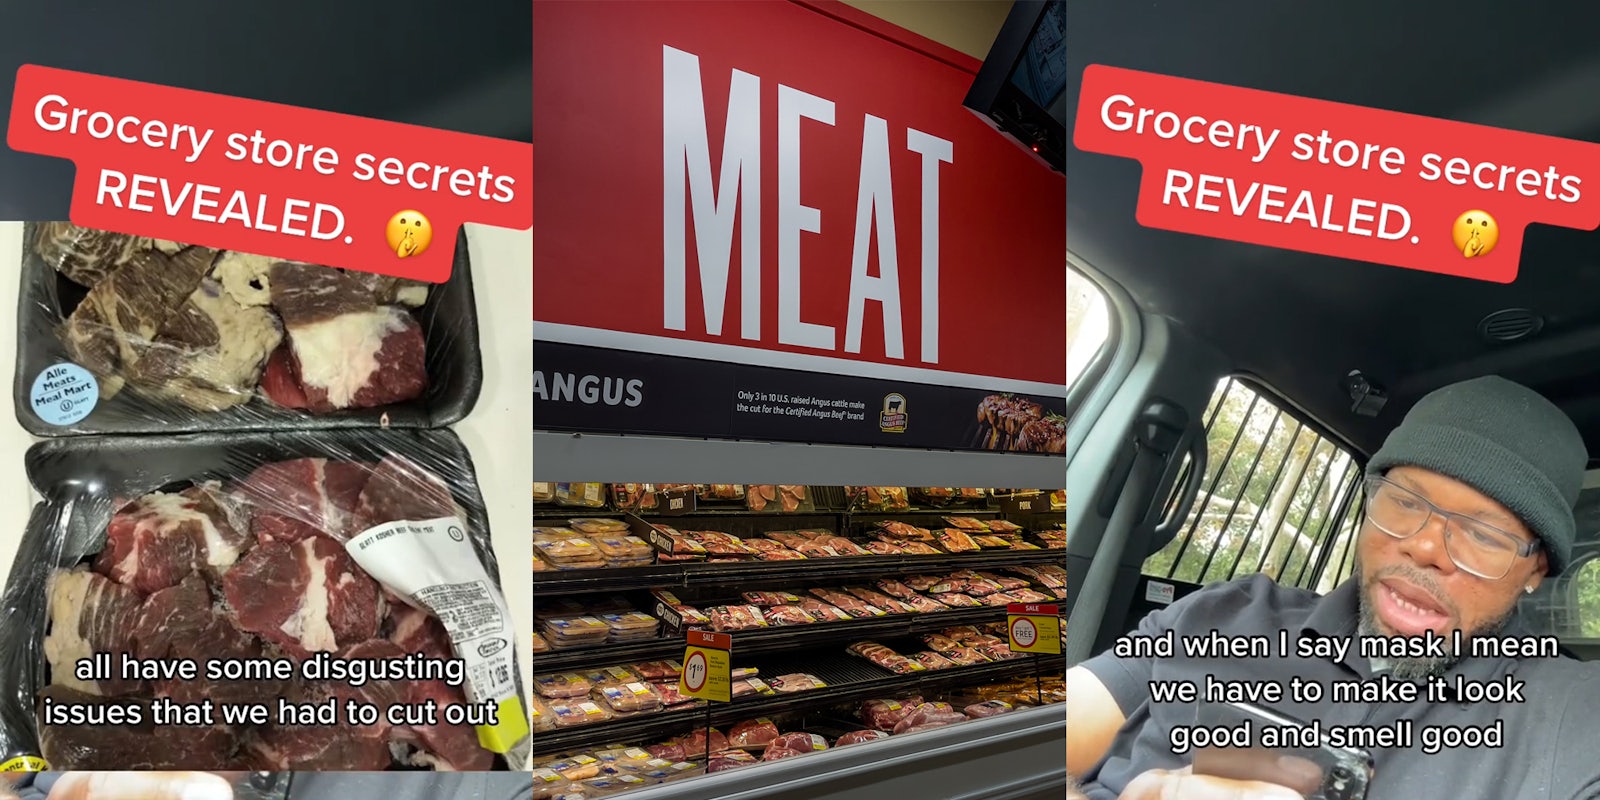 Customer Shares PSA About Marinated Meats at Grocery Stores